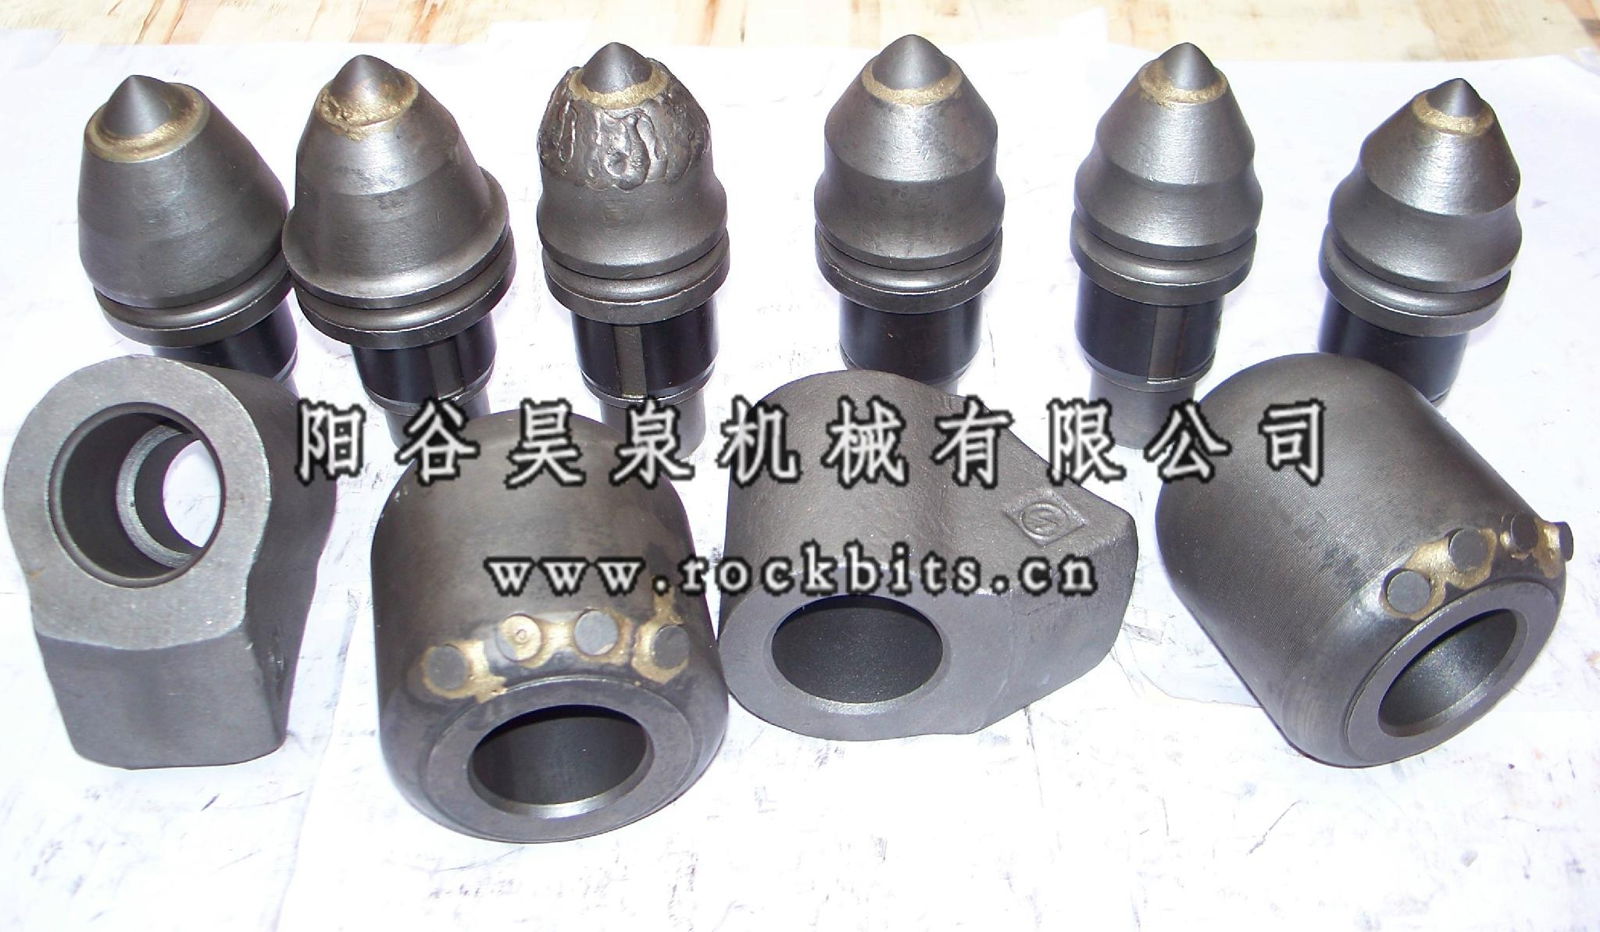 conical tools for foundation driiling 2